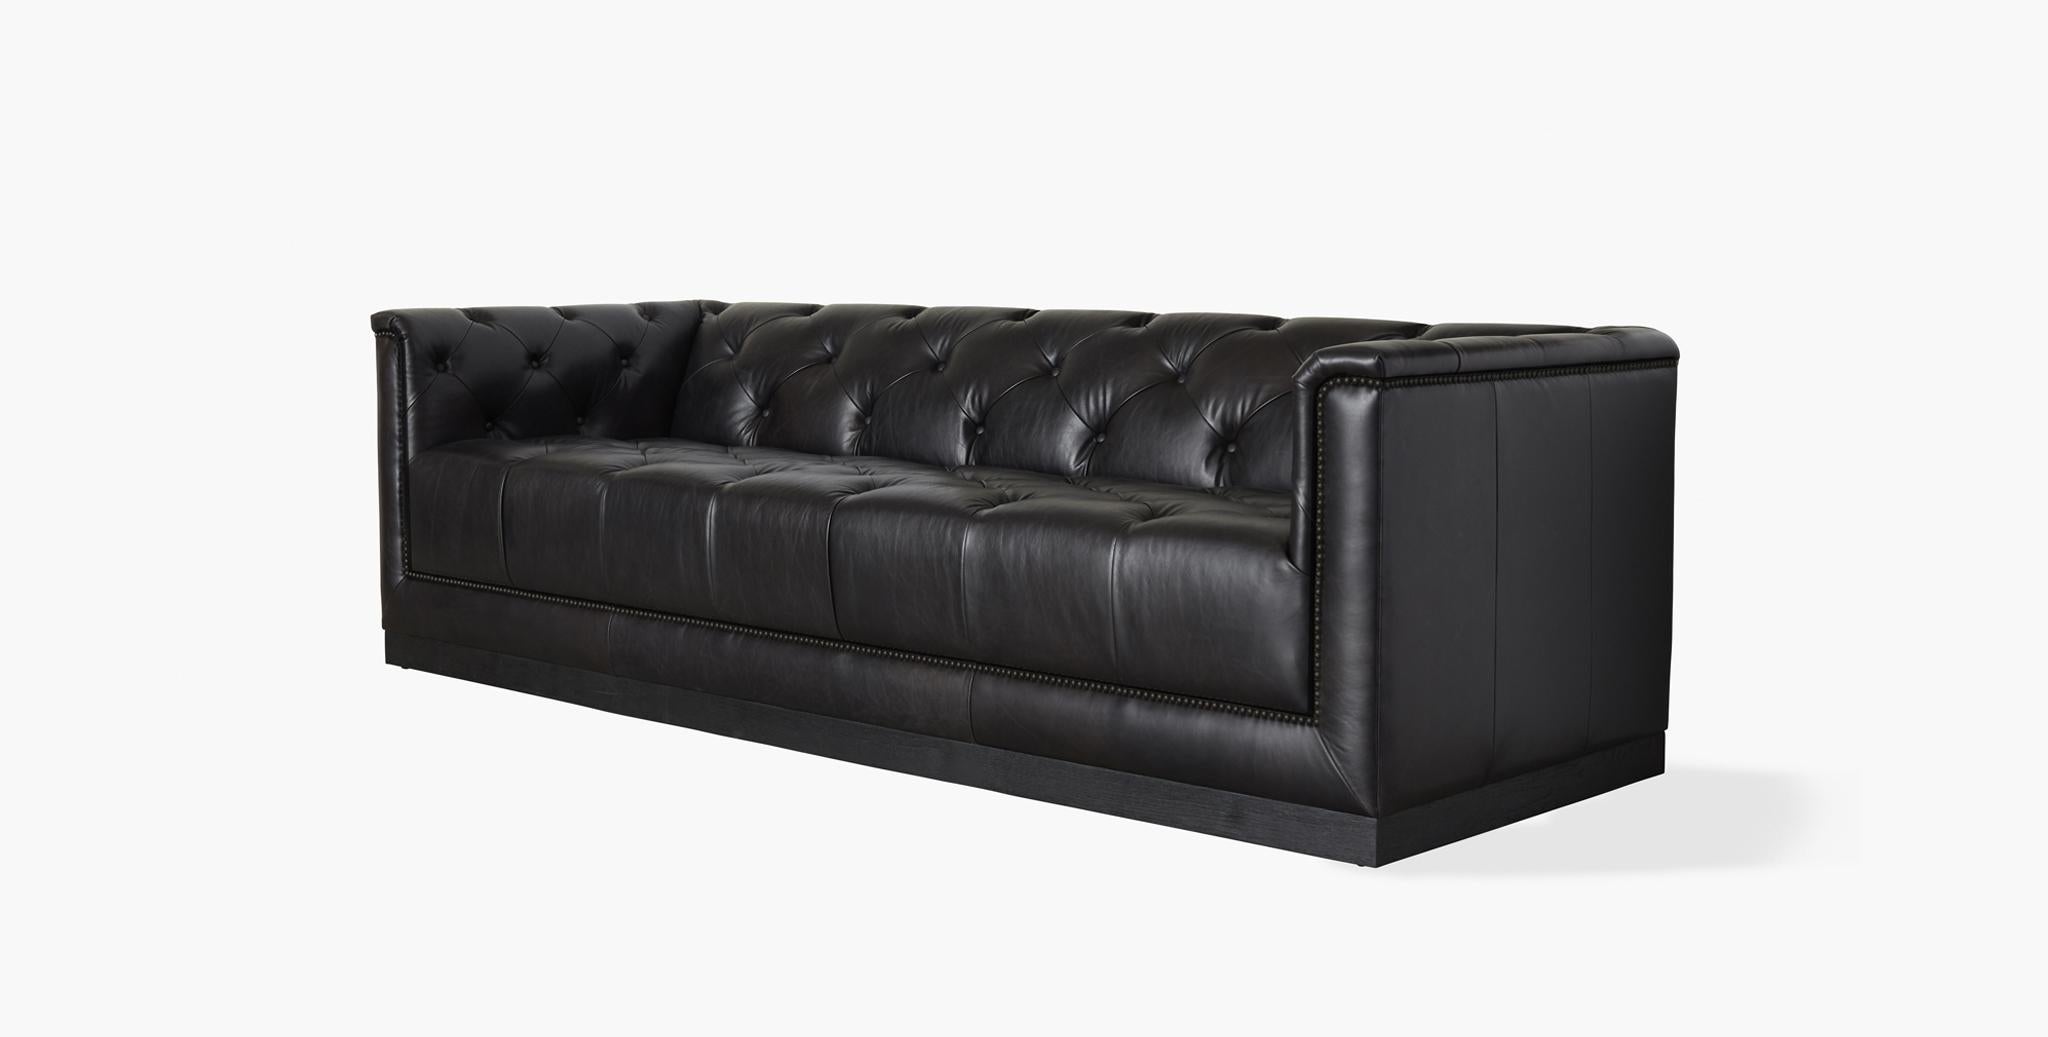 The Woodward is a modern reinterpretation of the iconic chesterfield sofa, upholstered in rich Italian leather, with hand button-tufting, svelte rolled arms, a deep single-cushion and a leather apron front. The Woodward is a statement piece that